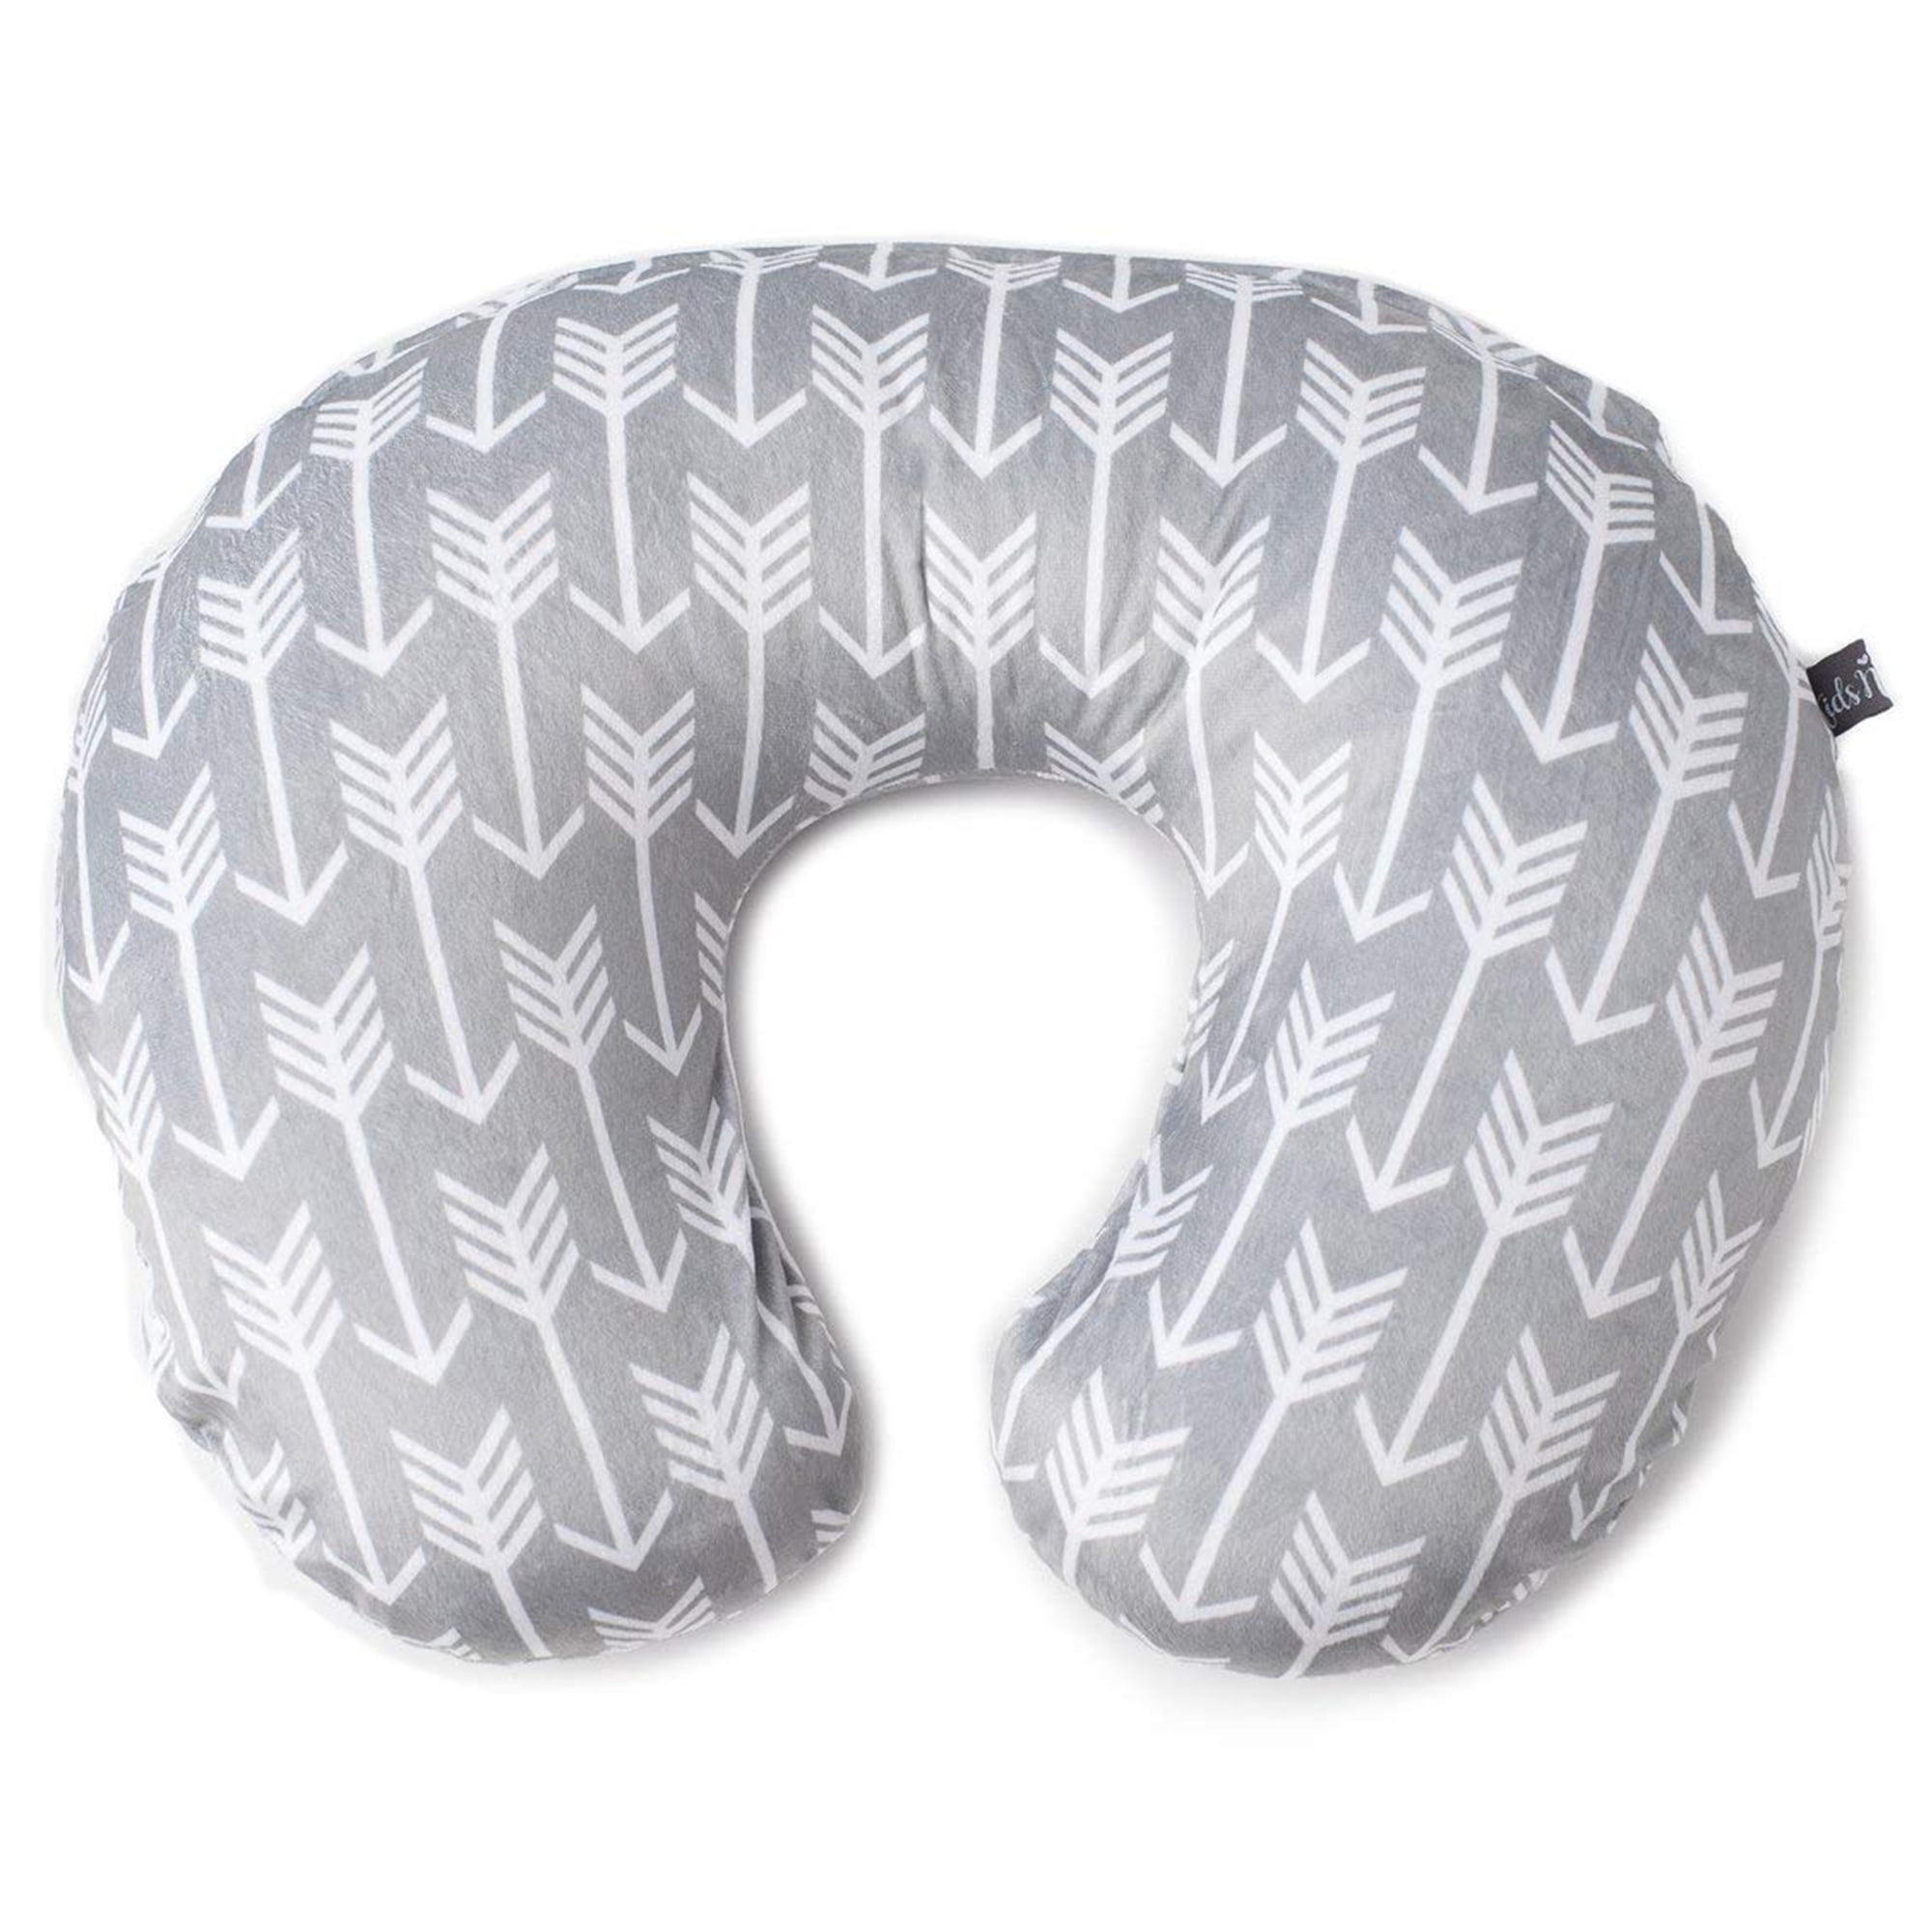 Feeding Pillow Cover Pregnancy Support Tool Floral Cotton Grey White Spare ! 